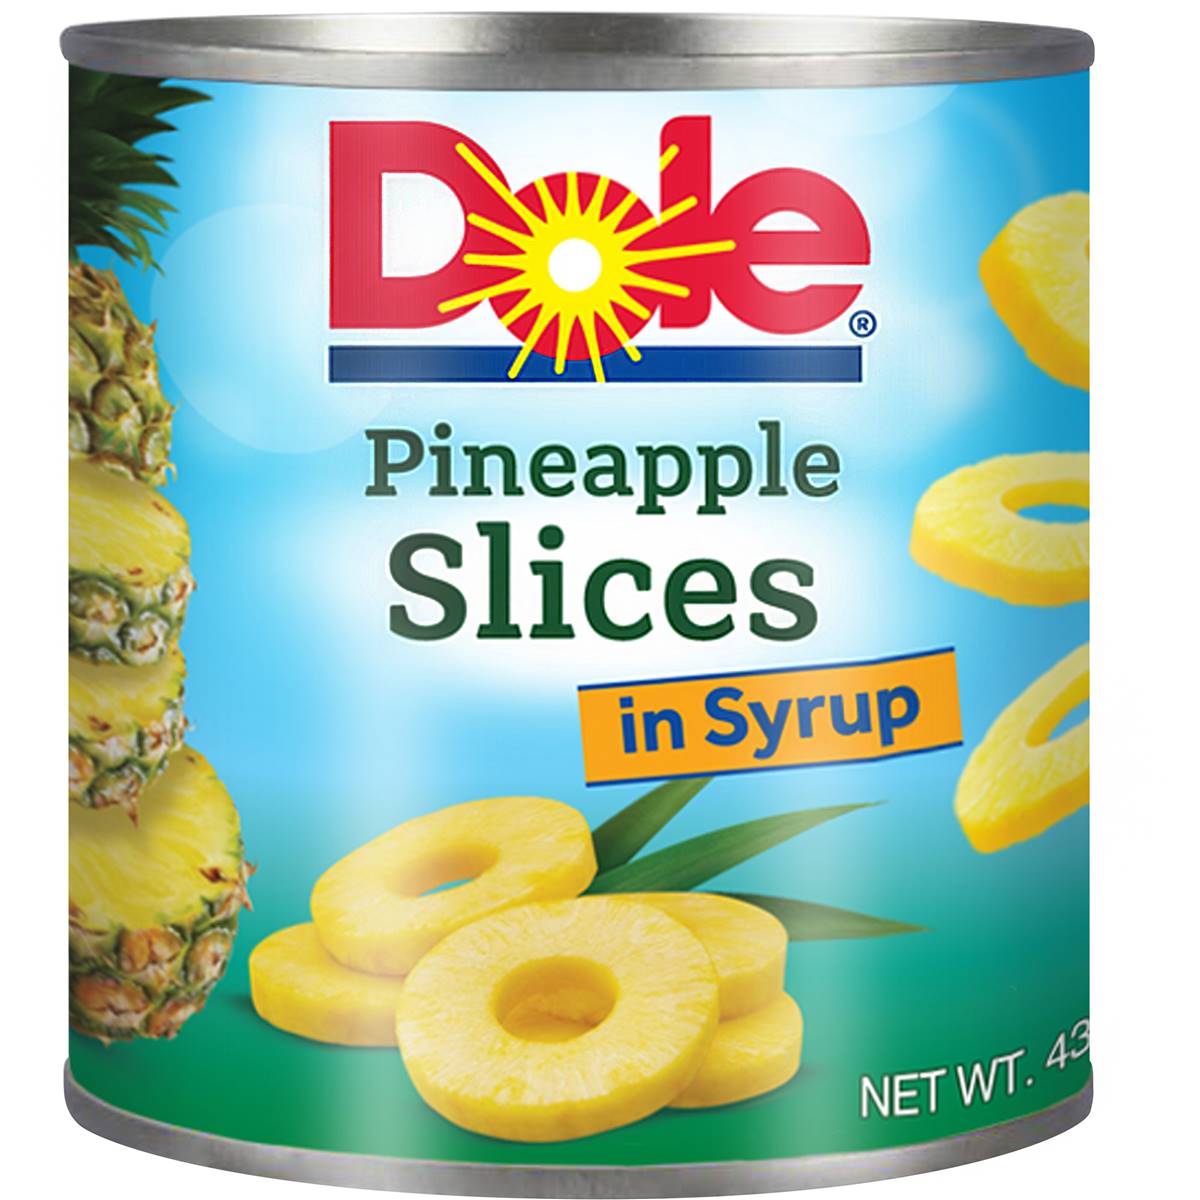 Dole Pineapple Slices In Syrup 439g